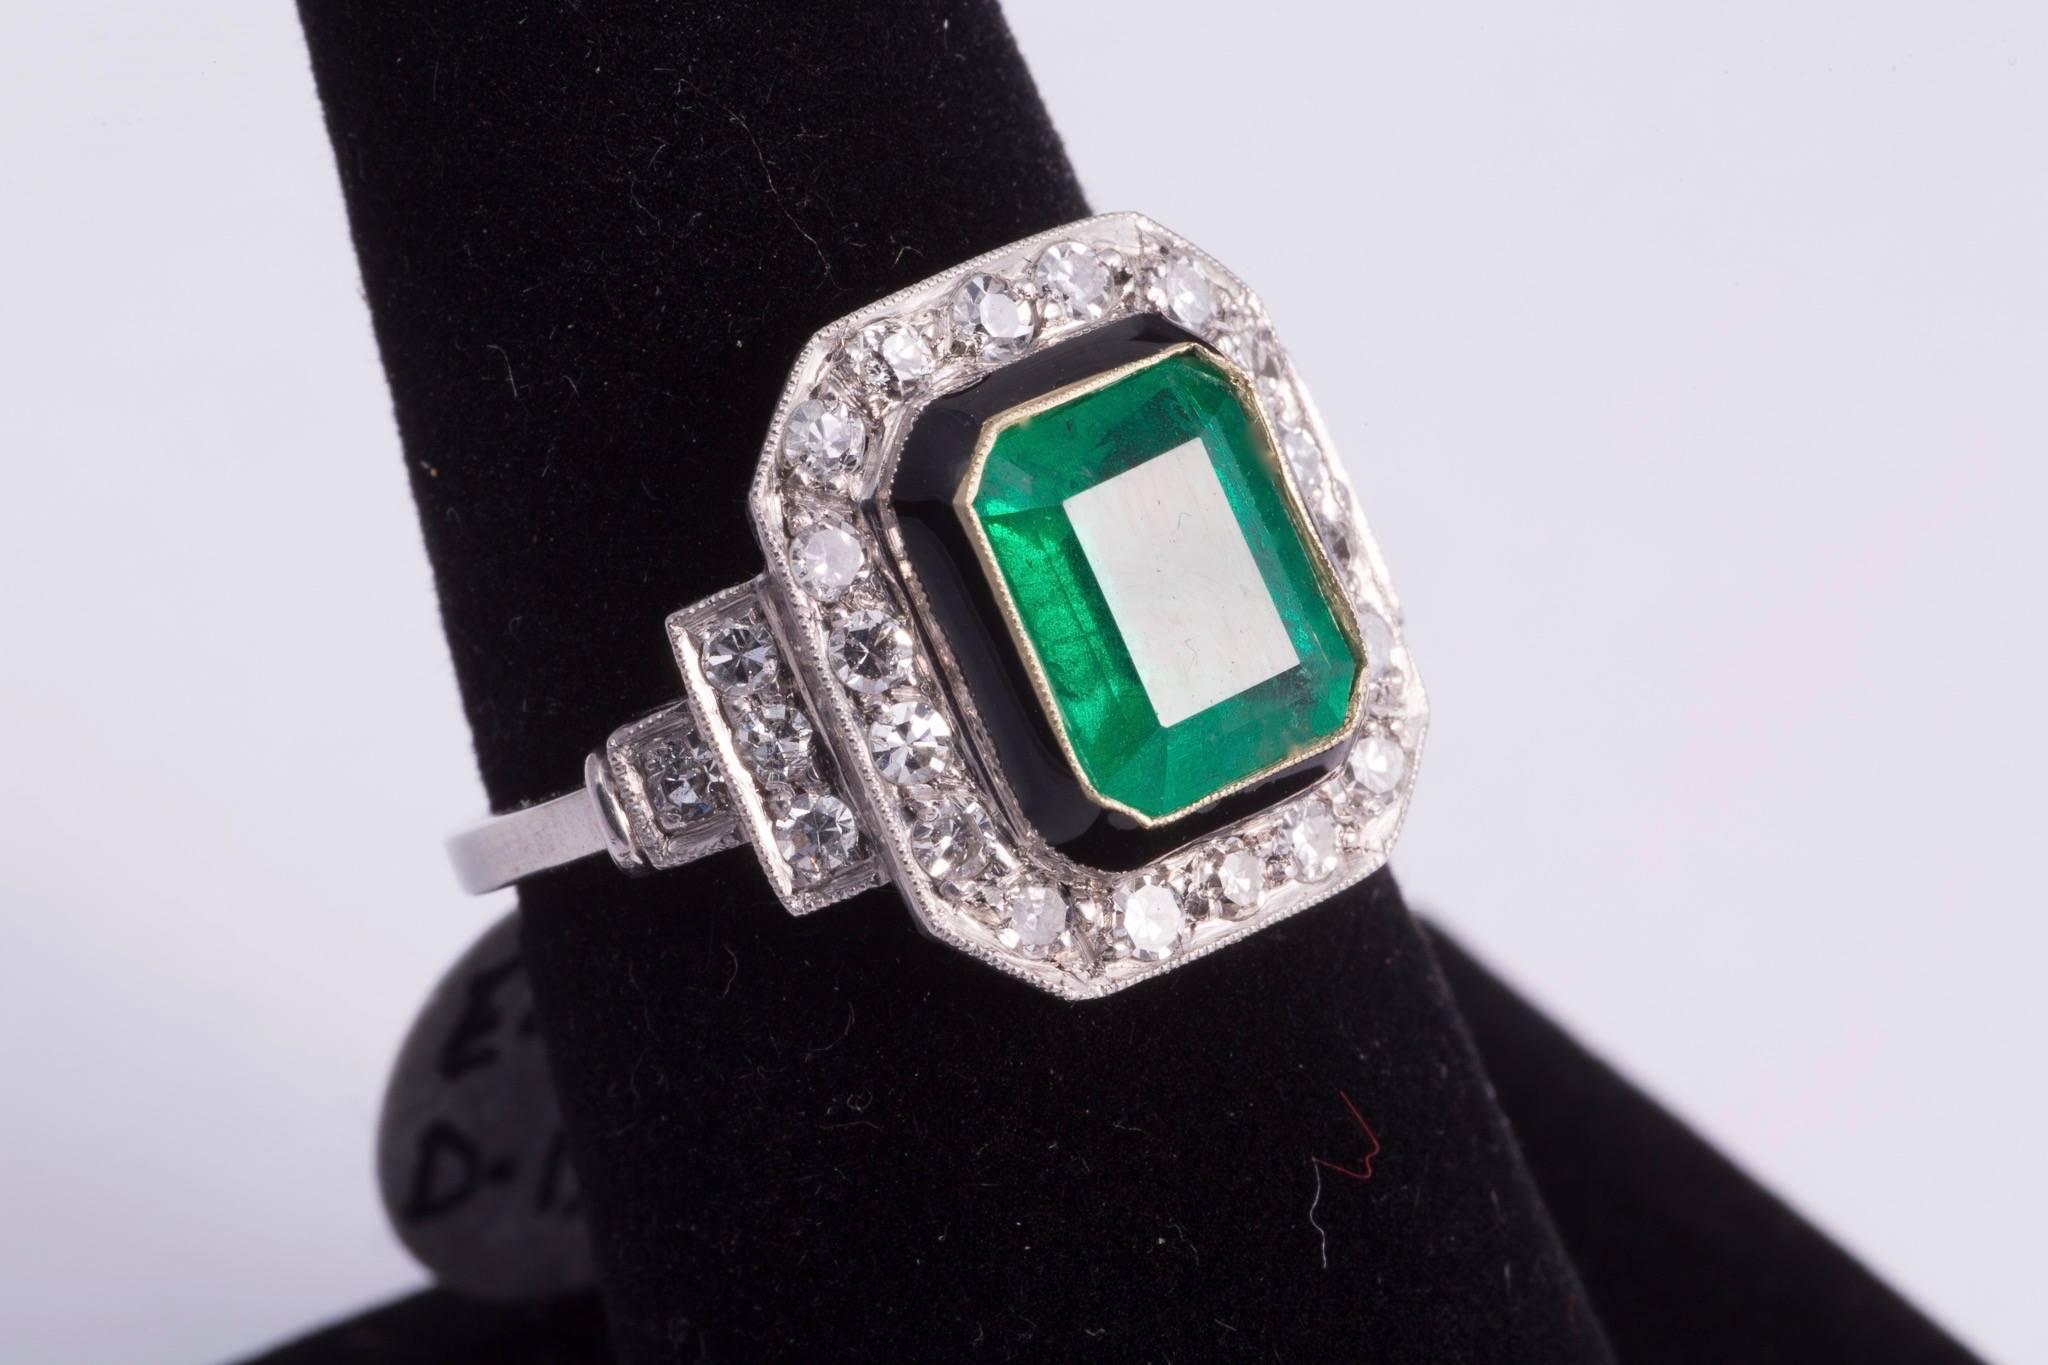 Gorgeous, natural, approx. 2.50ct emerald cut emerald in the center of the ring. The center stone is bezel set in gold and had a black enamel border. Stepping down from the enamel there are a total of 26 diamonds around and diamonds on the sides of